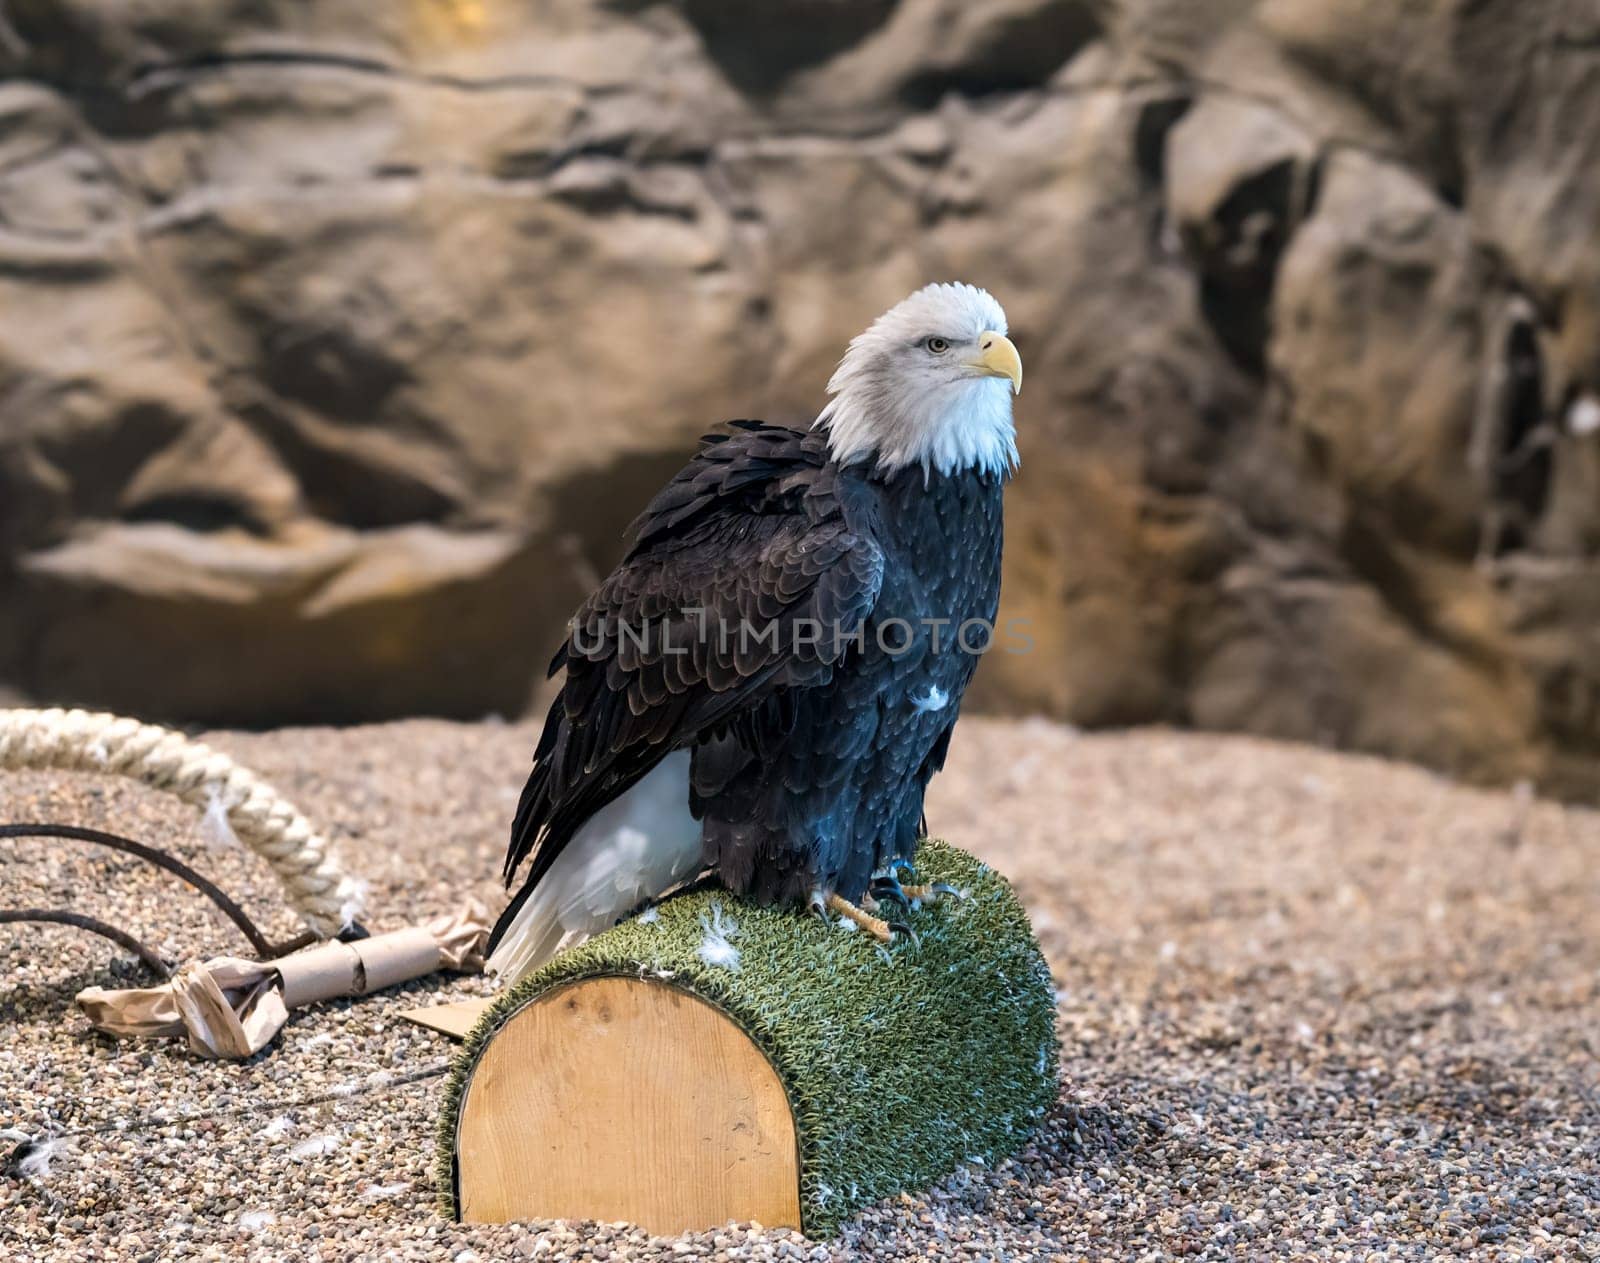 Rescued Bald Eagle on log posing for portrait by steheap